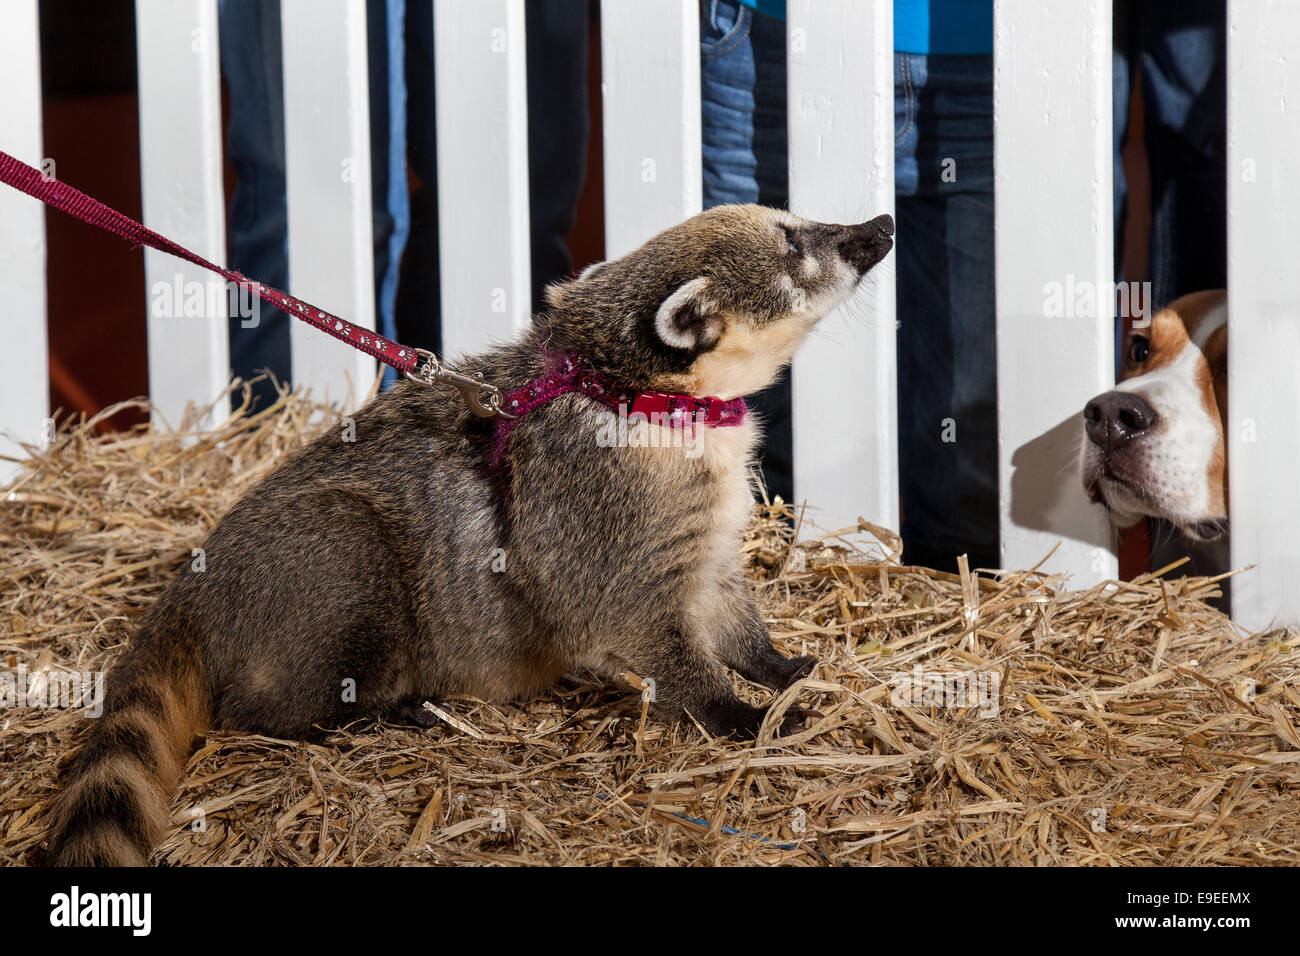 Racoon strange odd pets at Event City, Manchester, UK 26th October, 2014.  Dog looking at Coati at the Family Pet Show taking place at EventCity, adjacent to The Trafford Centre. Stock Photo